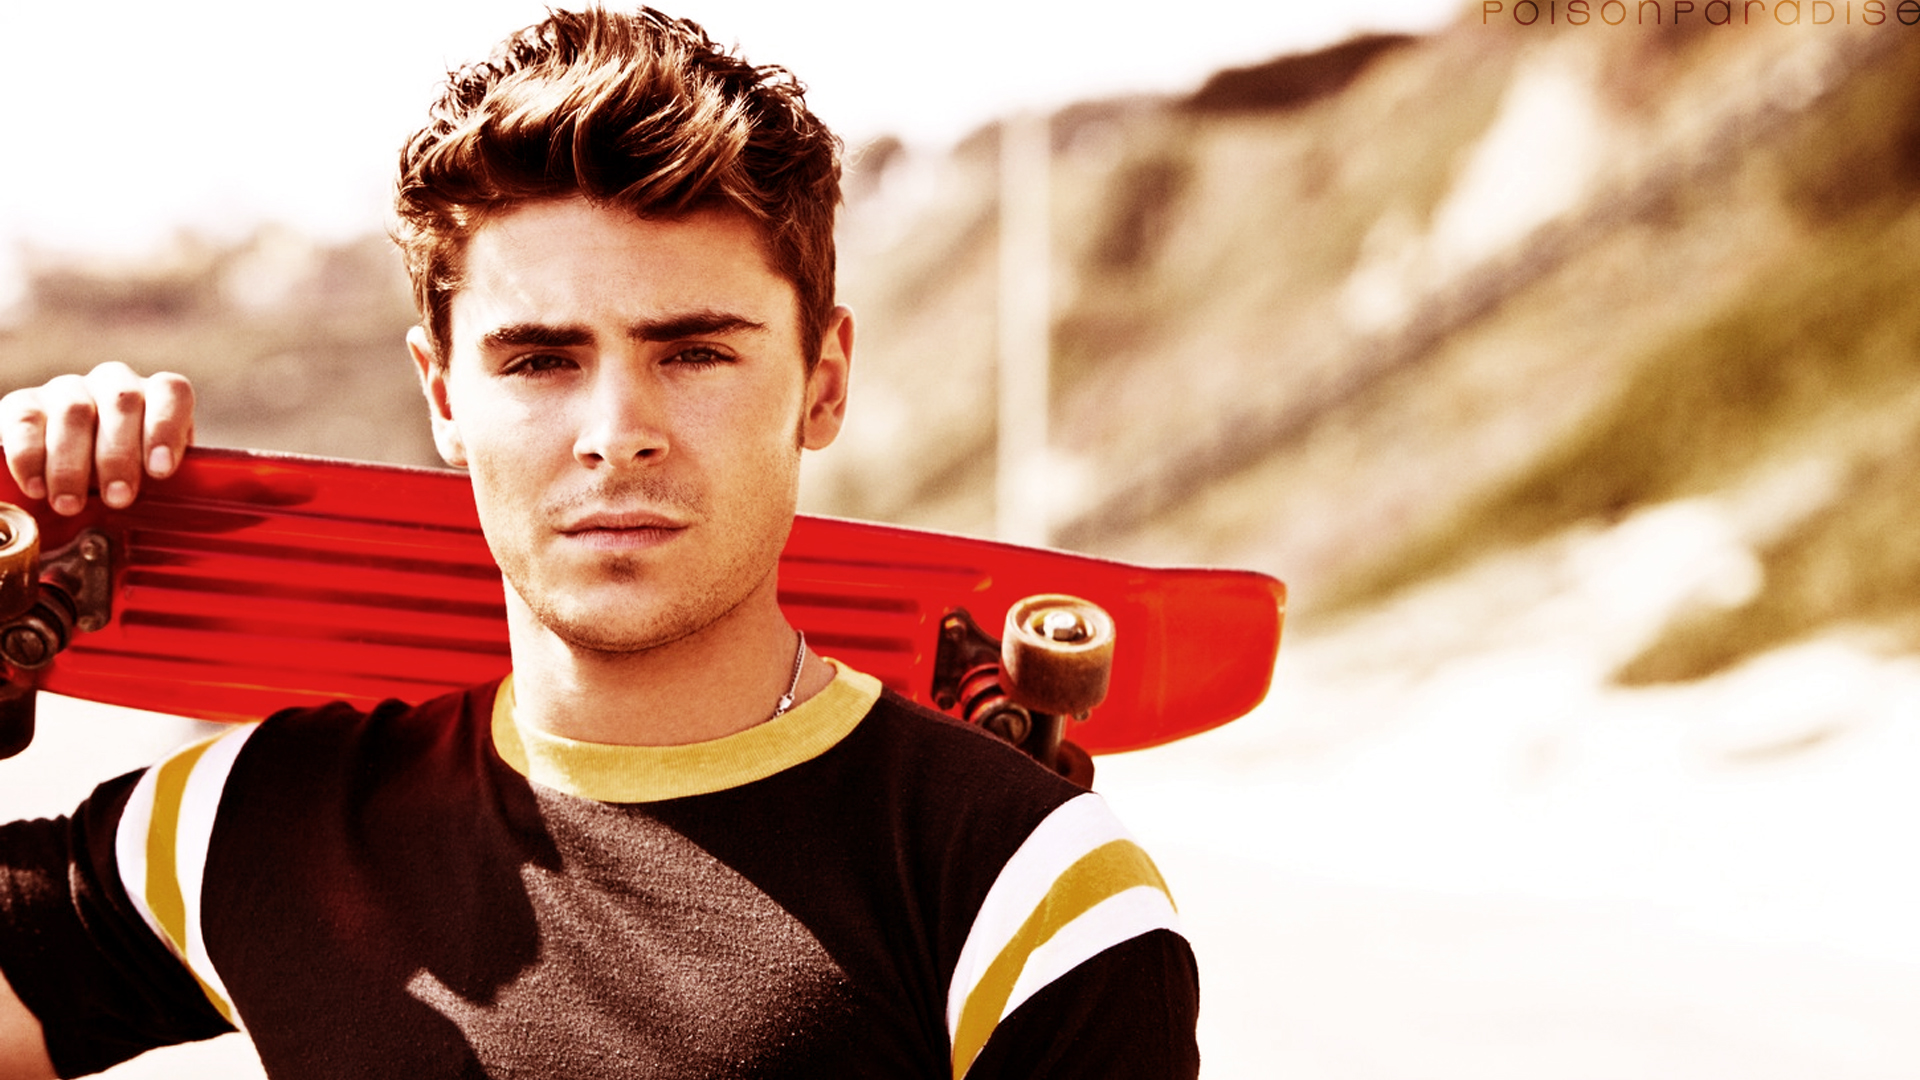 http://s1.bwallpapers.com/wallpapers/2014/01/01/zac-efron-backgrounds_095924.jpg